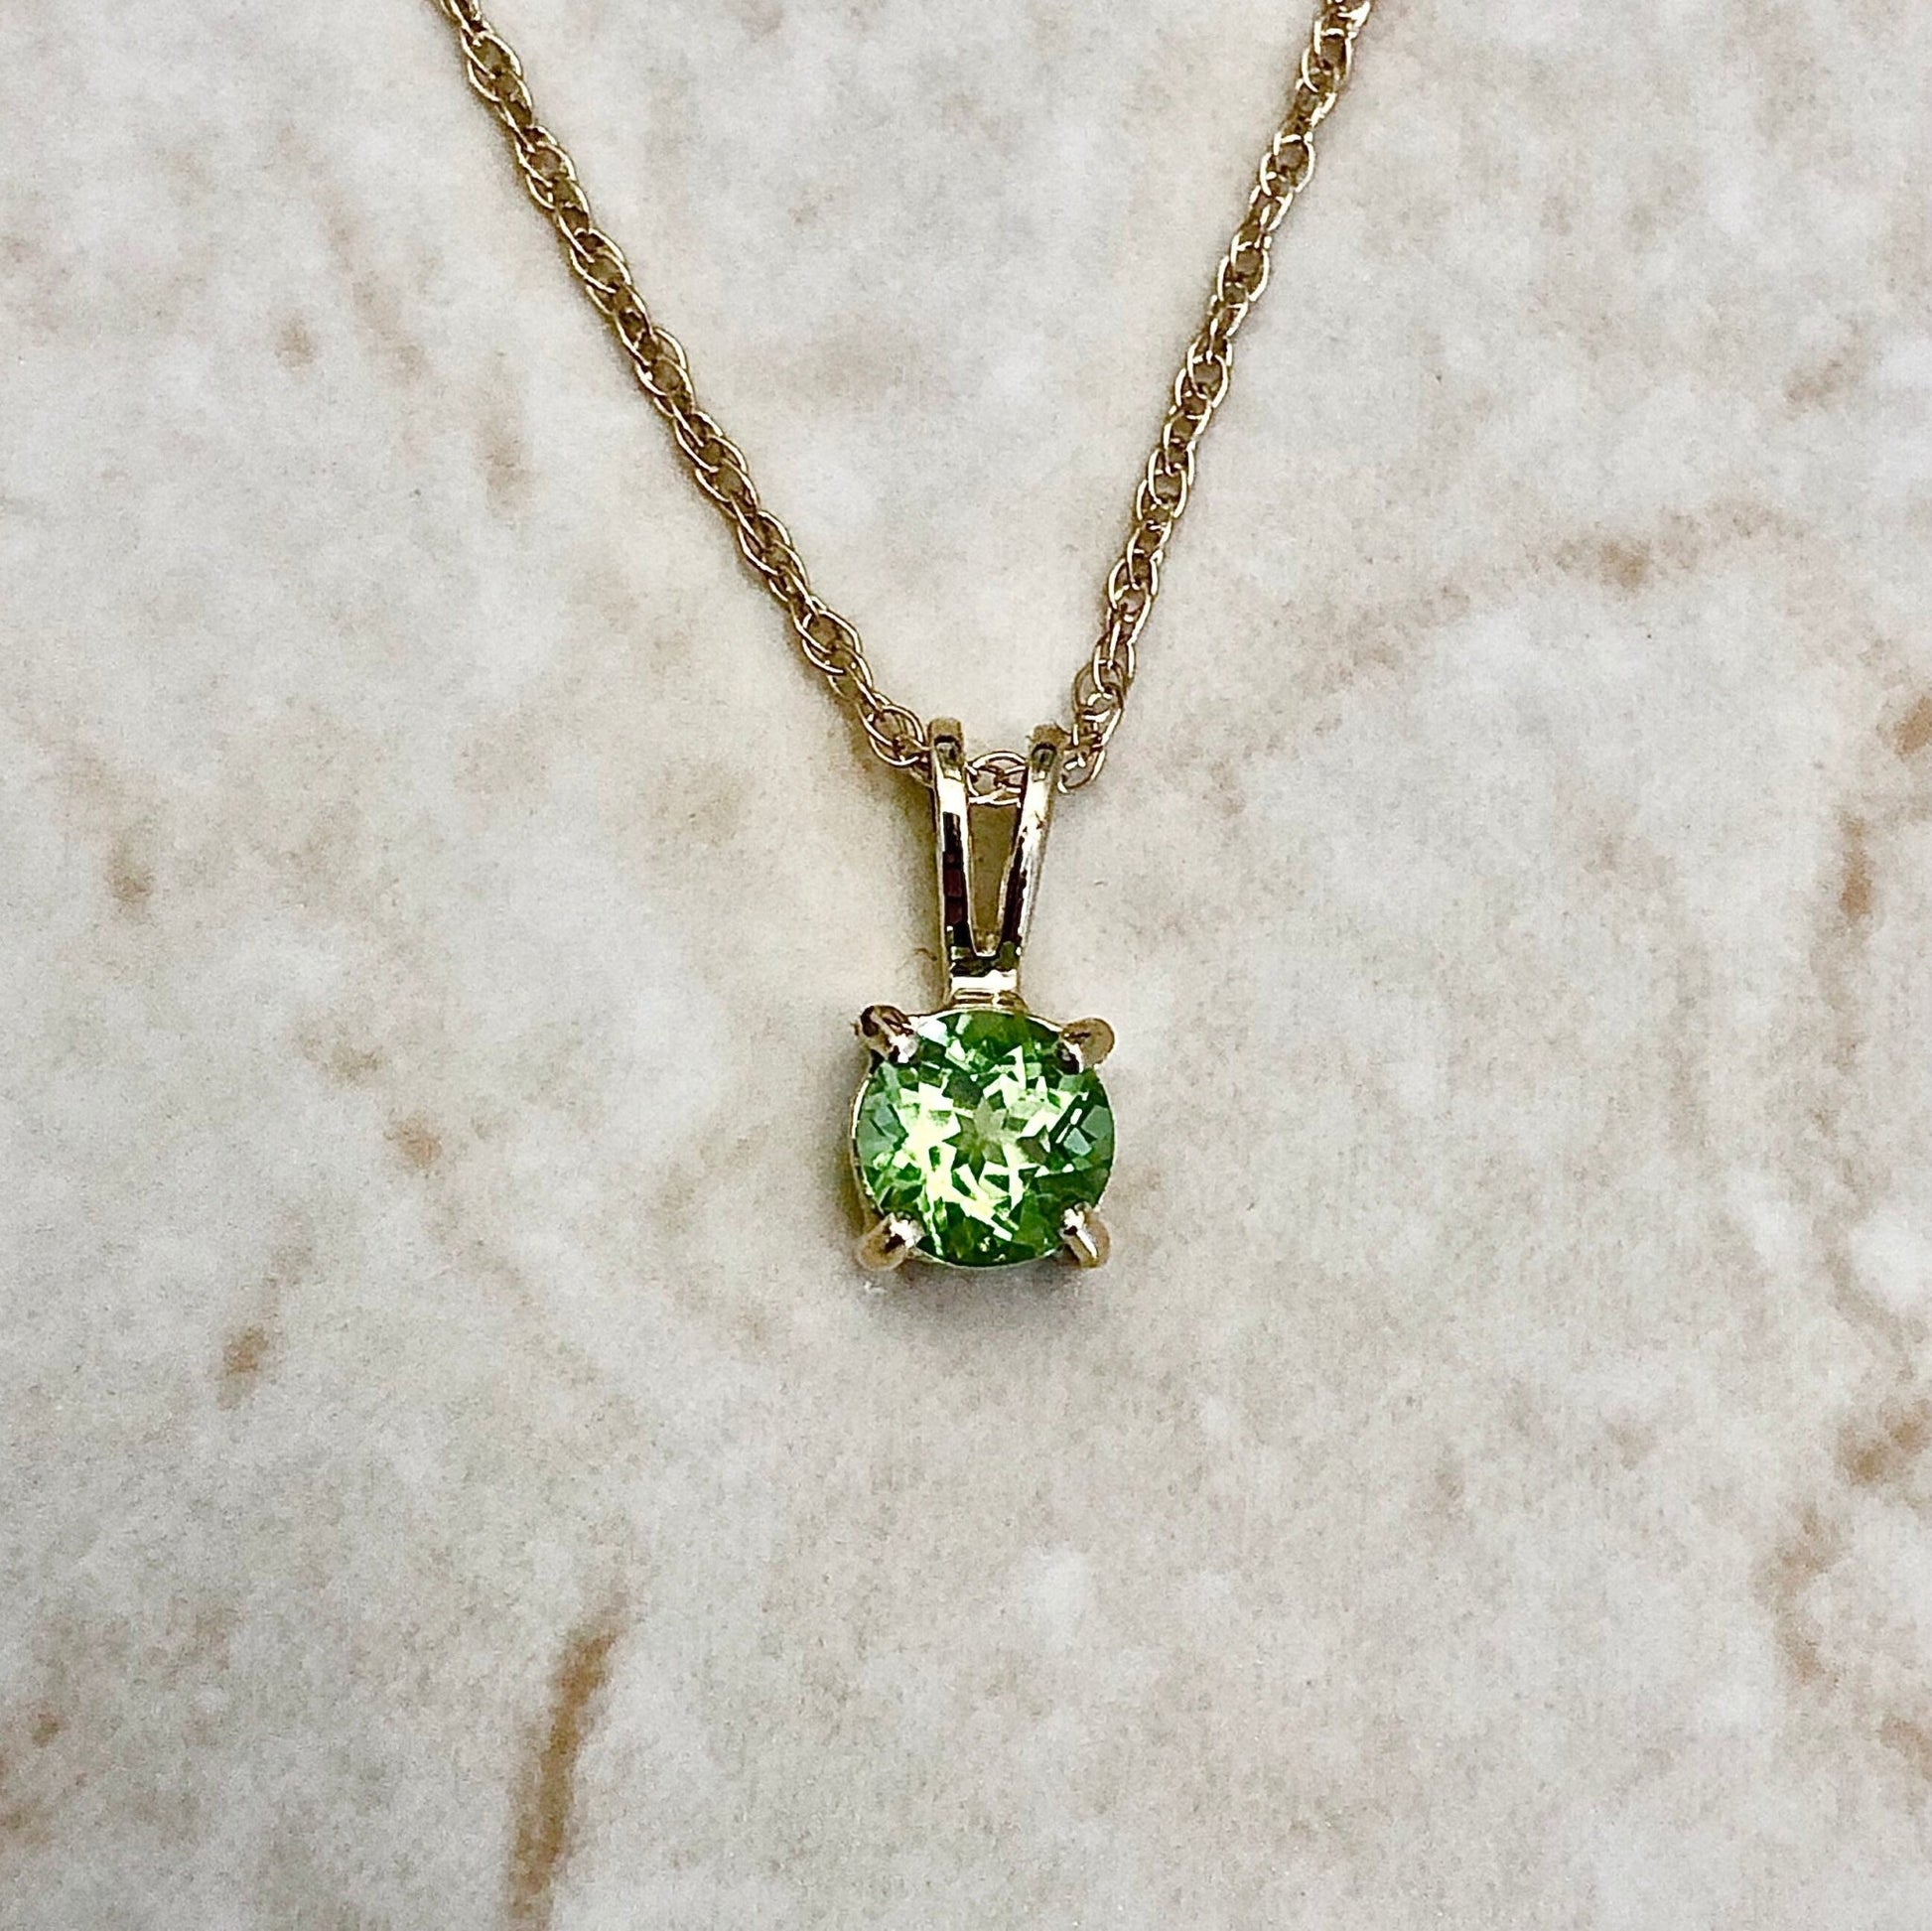 14K Peridot Solitaire Pendant Necklace - Yellow Gold Peridot Pendant Necklace - Round Peridot Necklace - Birthday Gift -Best Gift For Her